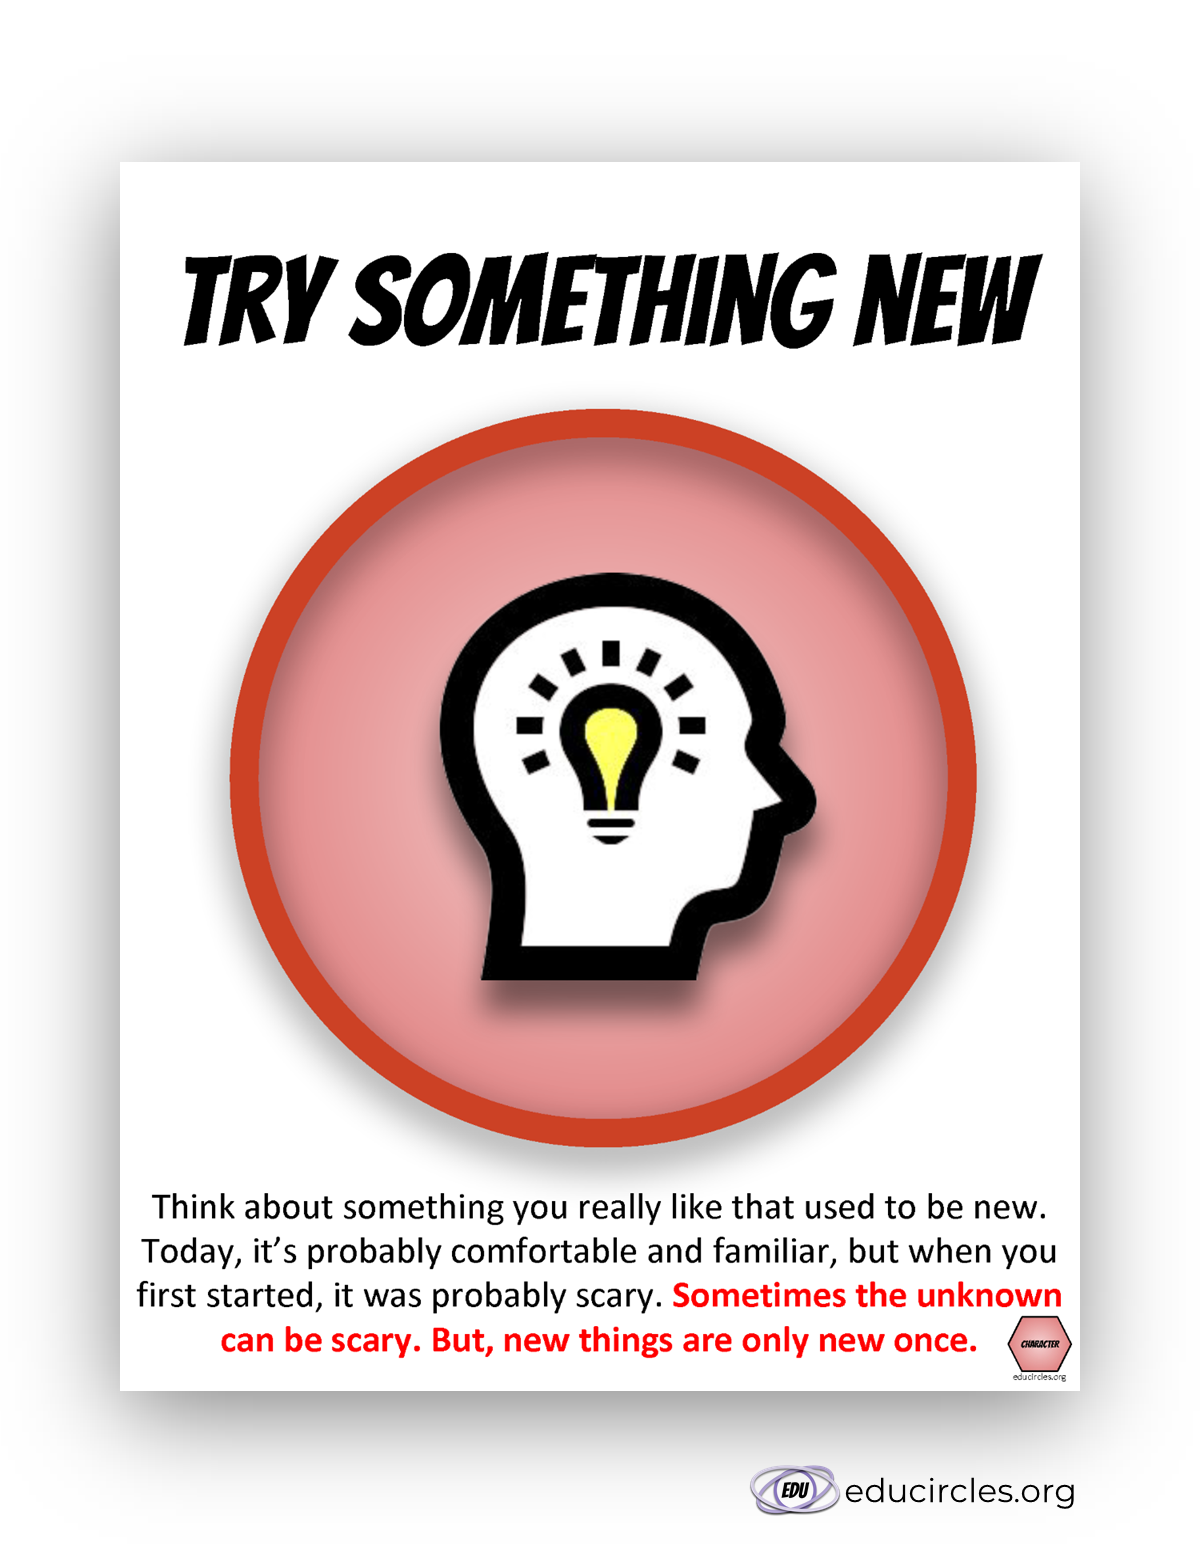 FREE Growth Mindset Poster PDF slide 3 - strategy: try something new